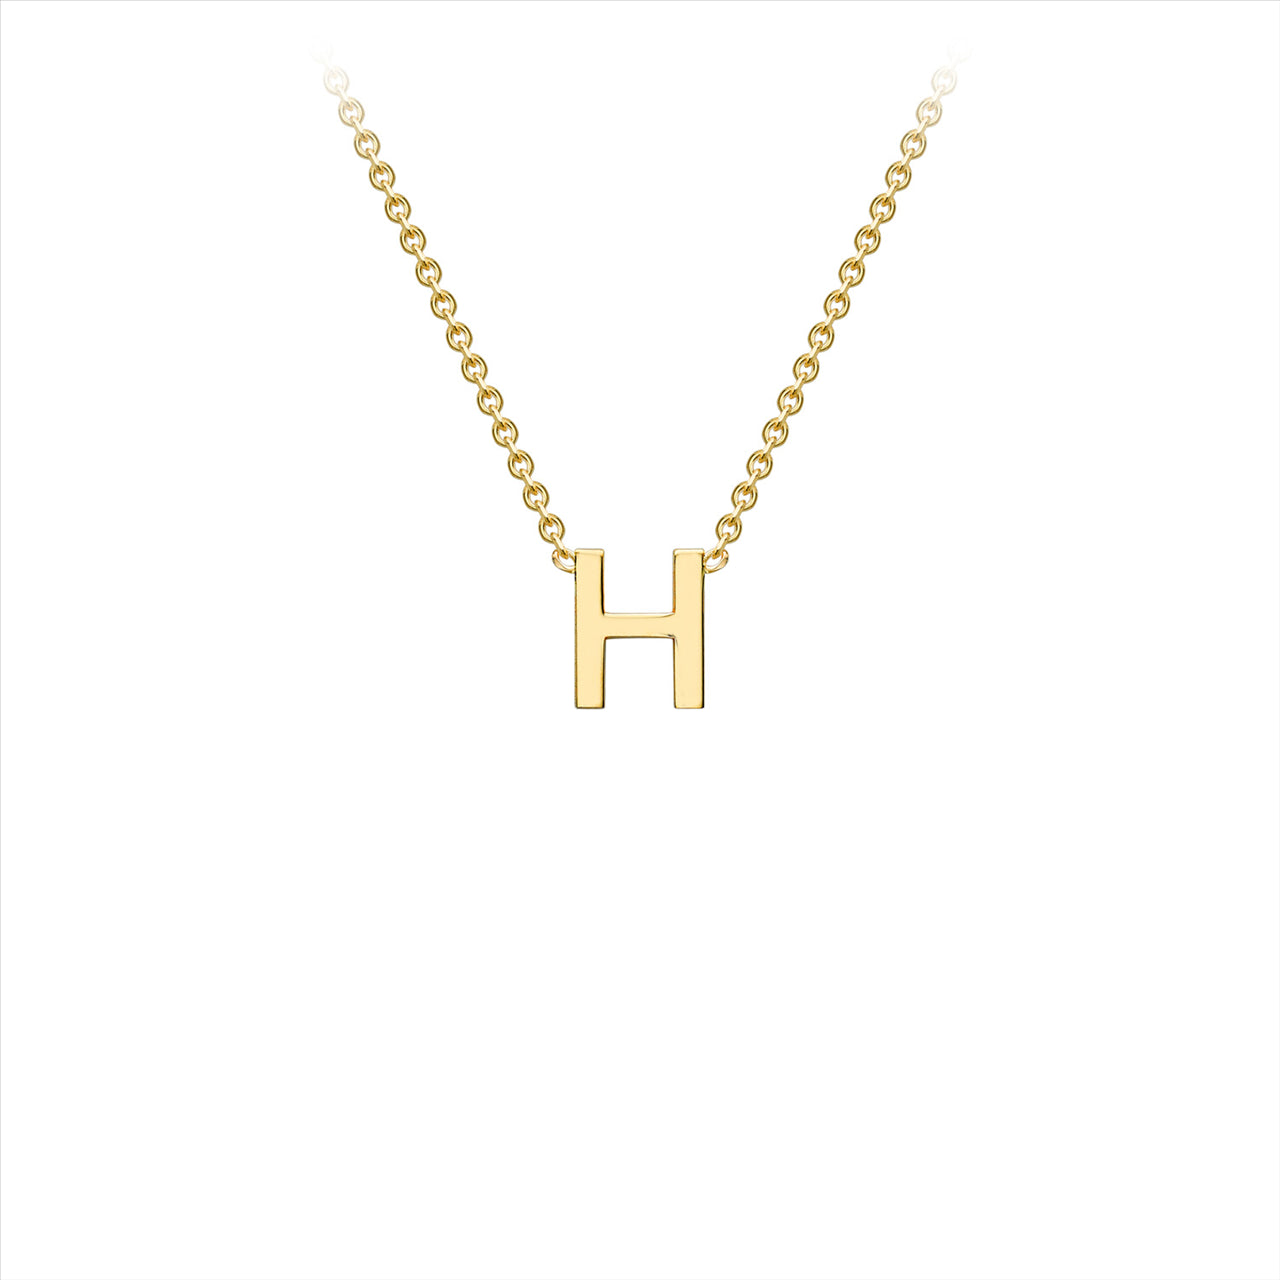 9ct Yellow Gold Petite Initial Necklace - H